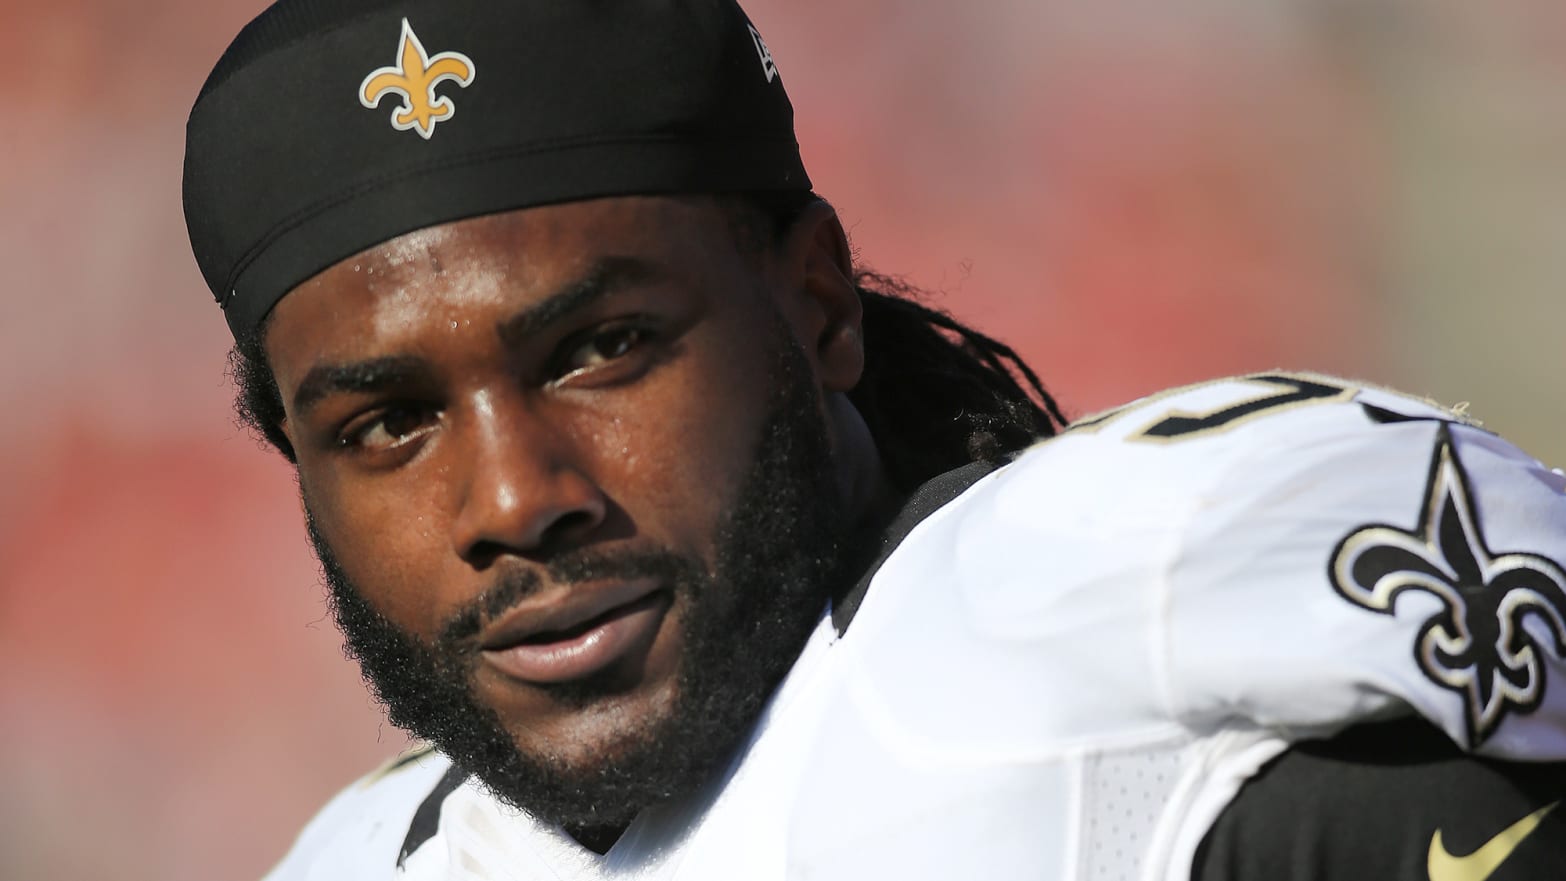 Former linebacker for the New Orleans Saints, Ronald Powell, died on Tuesday at the age of 32.